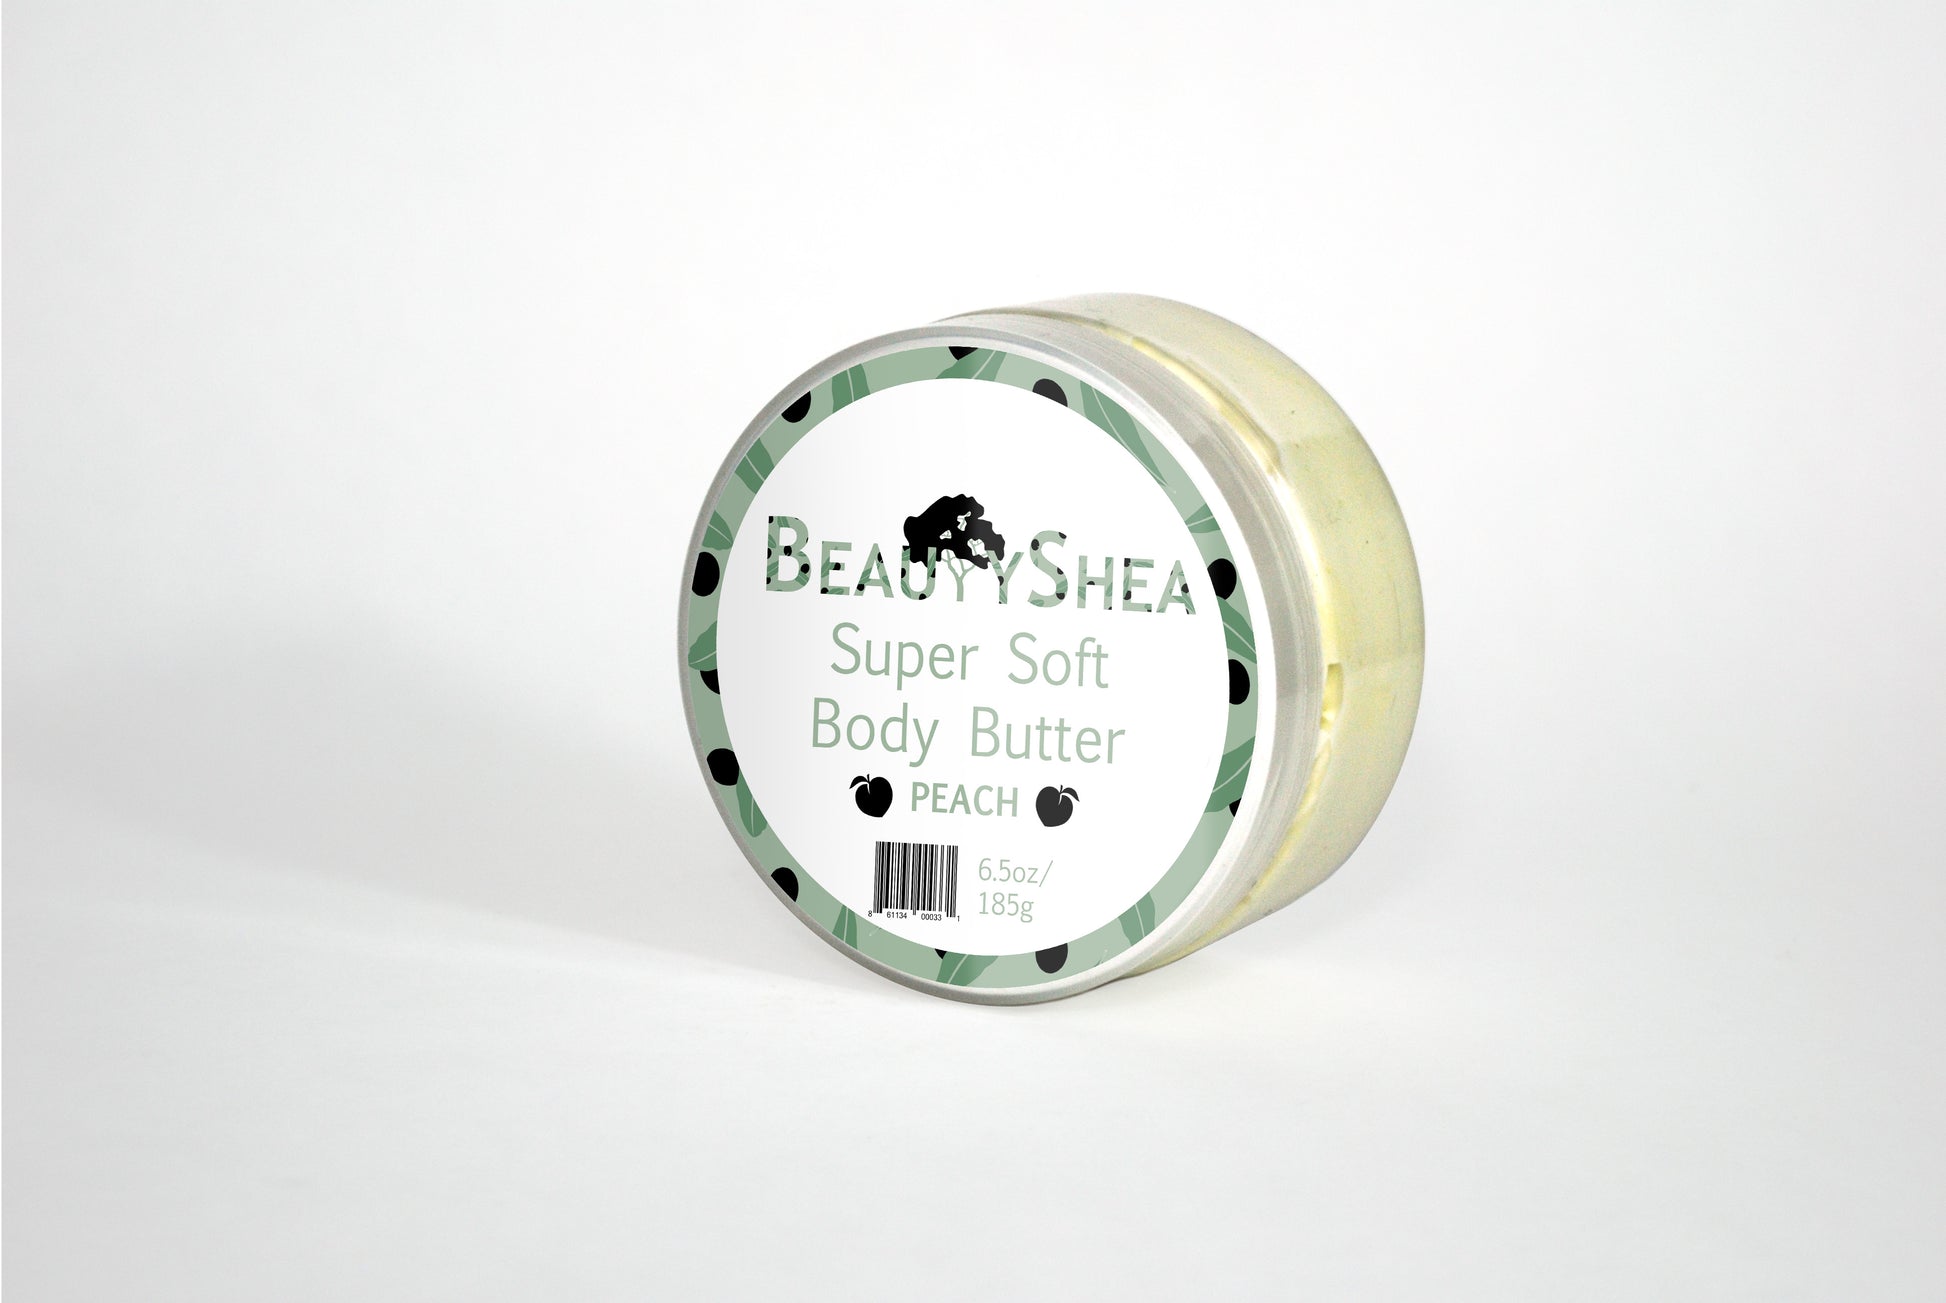 Supper soft body butter Peach, Pure Clarifying Mandarin, Purifying and Toning, For All Skin Type, Natural Ingredients, 8 oz.